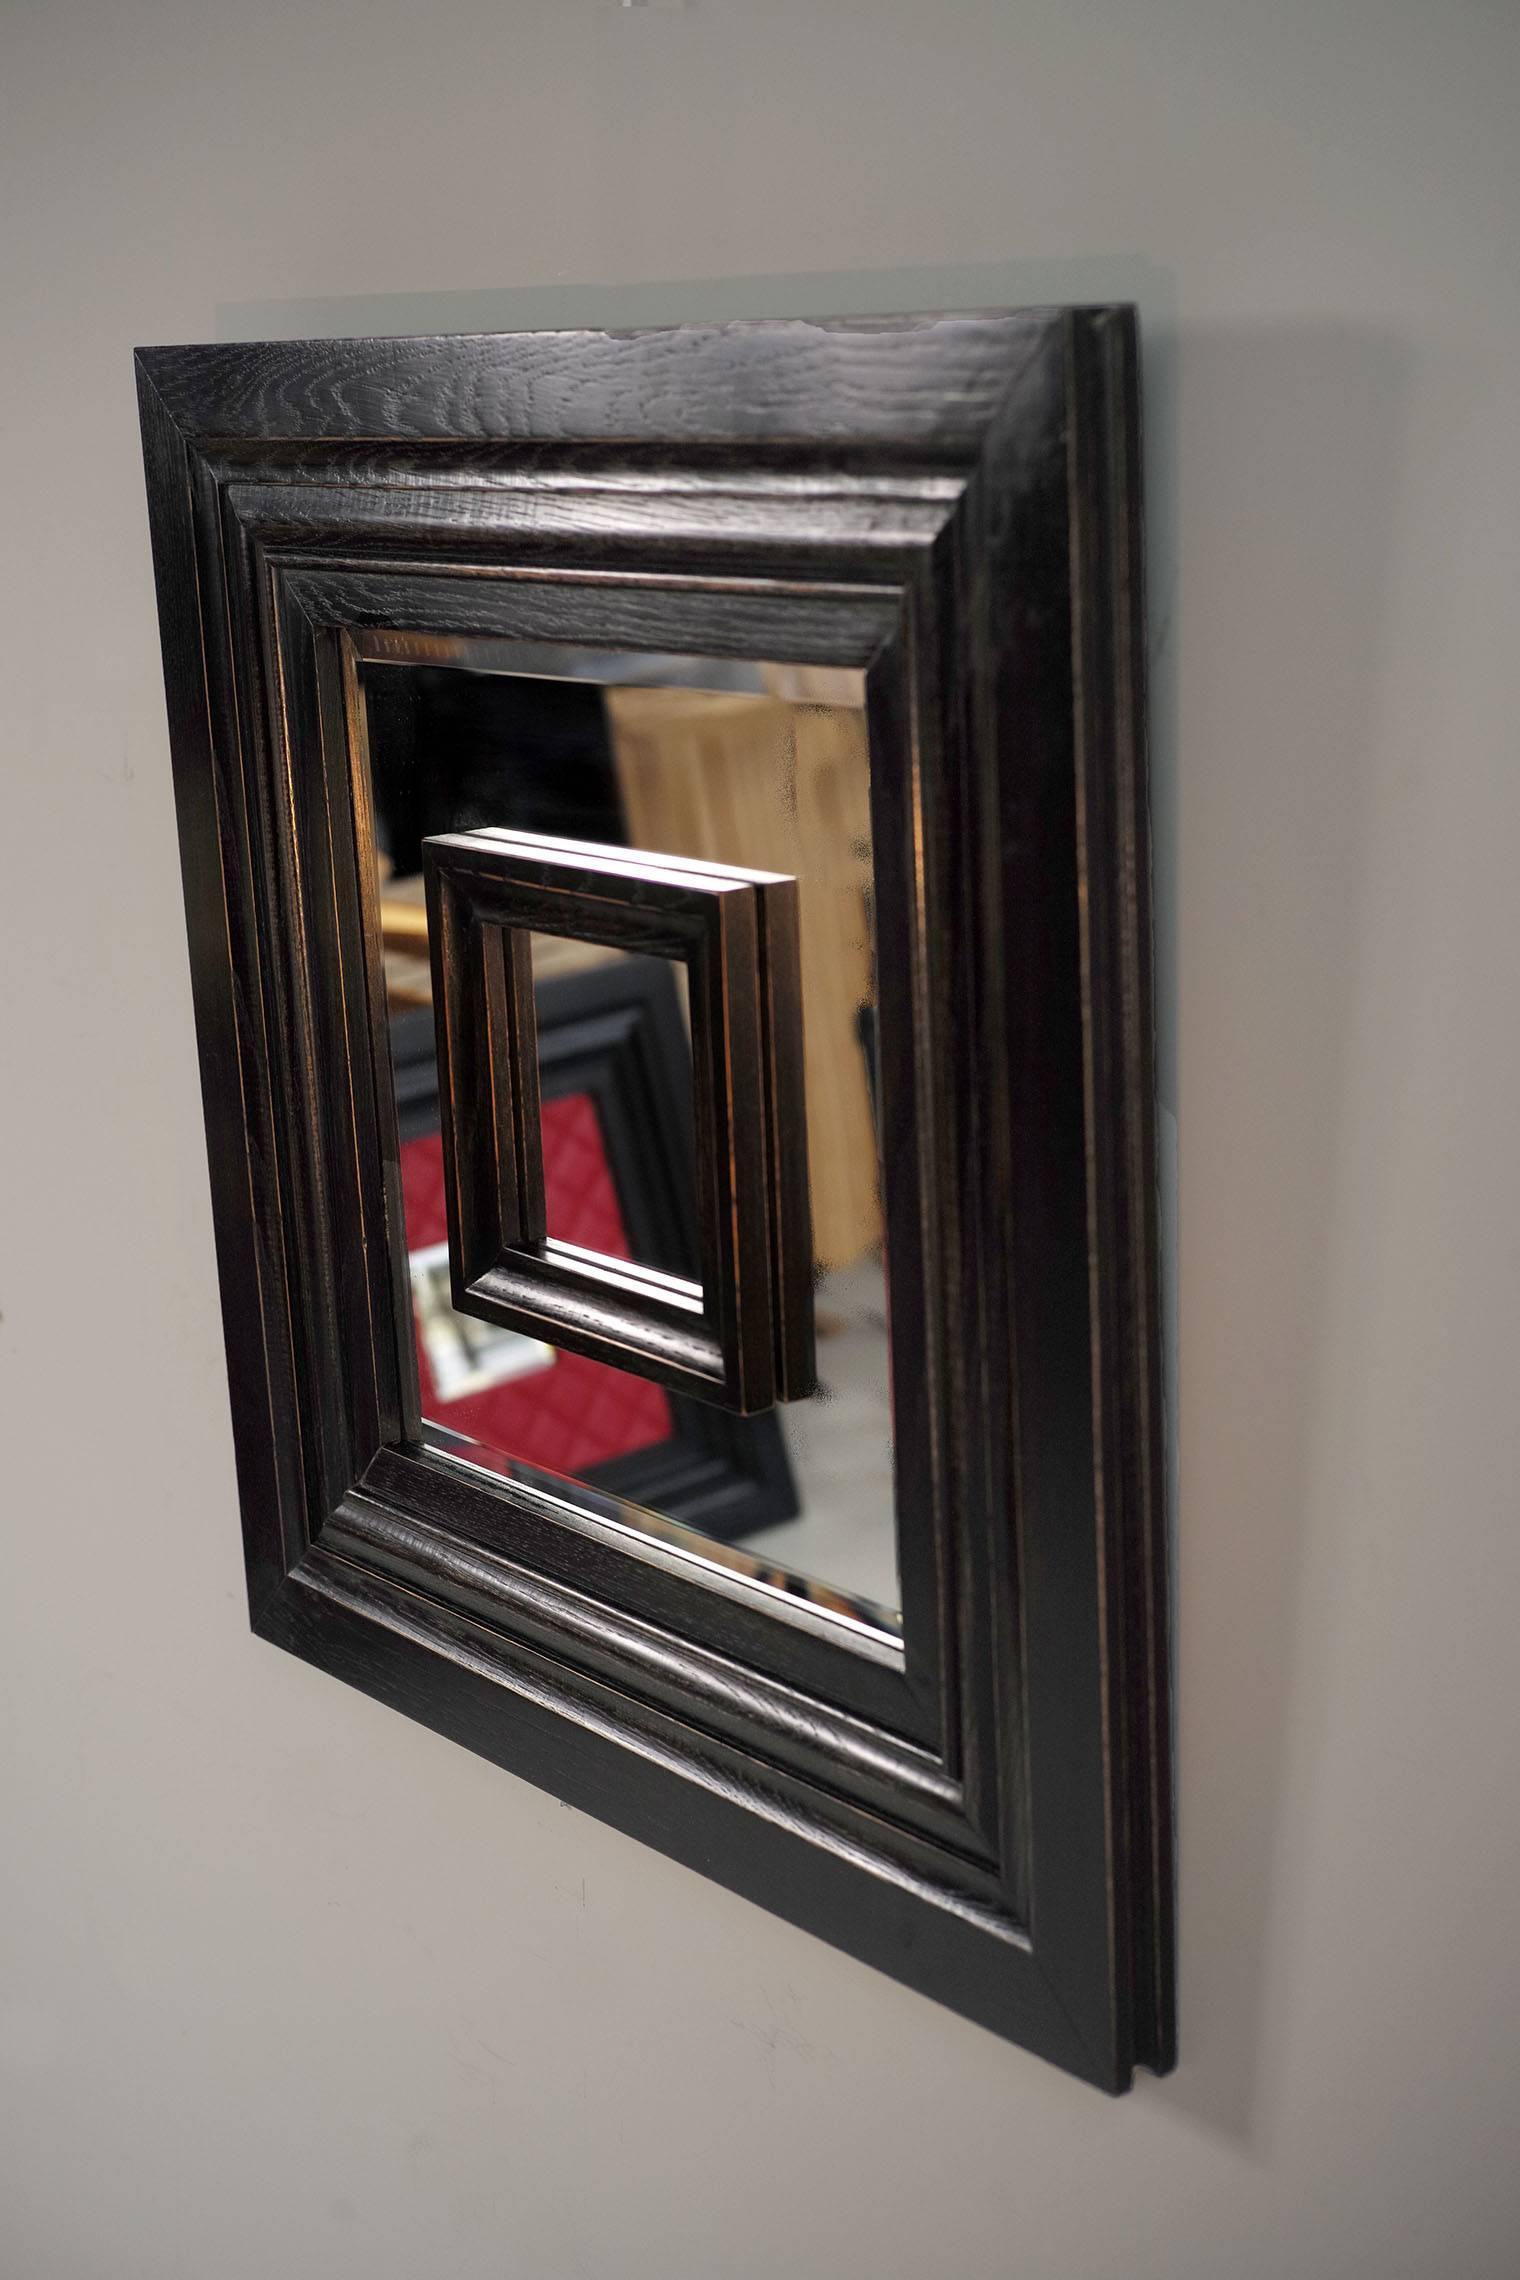 Prototype no 0 of Philippe Delzers' Flamand mirror for Etitis, France 2006
Blackened oak, worn,  beveled mirror.
Perfect condition, from personal collection of Philippe Delzers.
Certificate of authenticity provided..

Phillipe Delzers, after